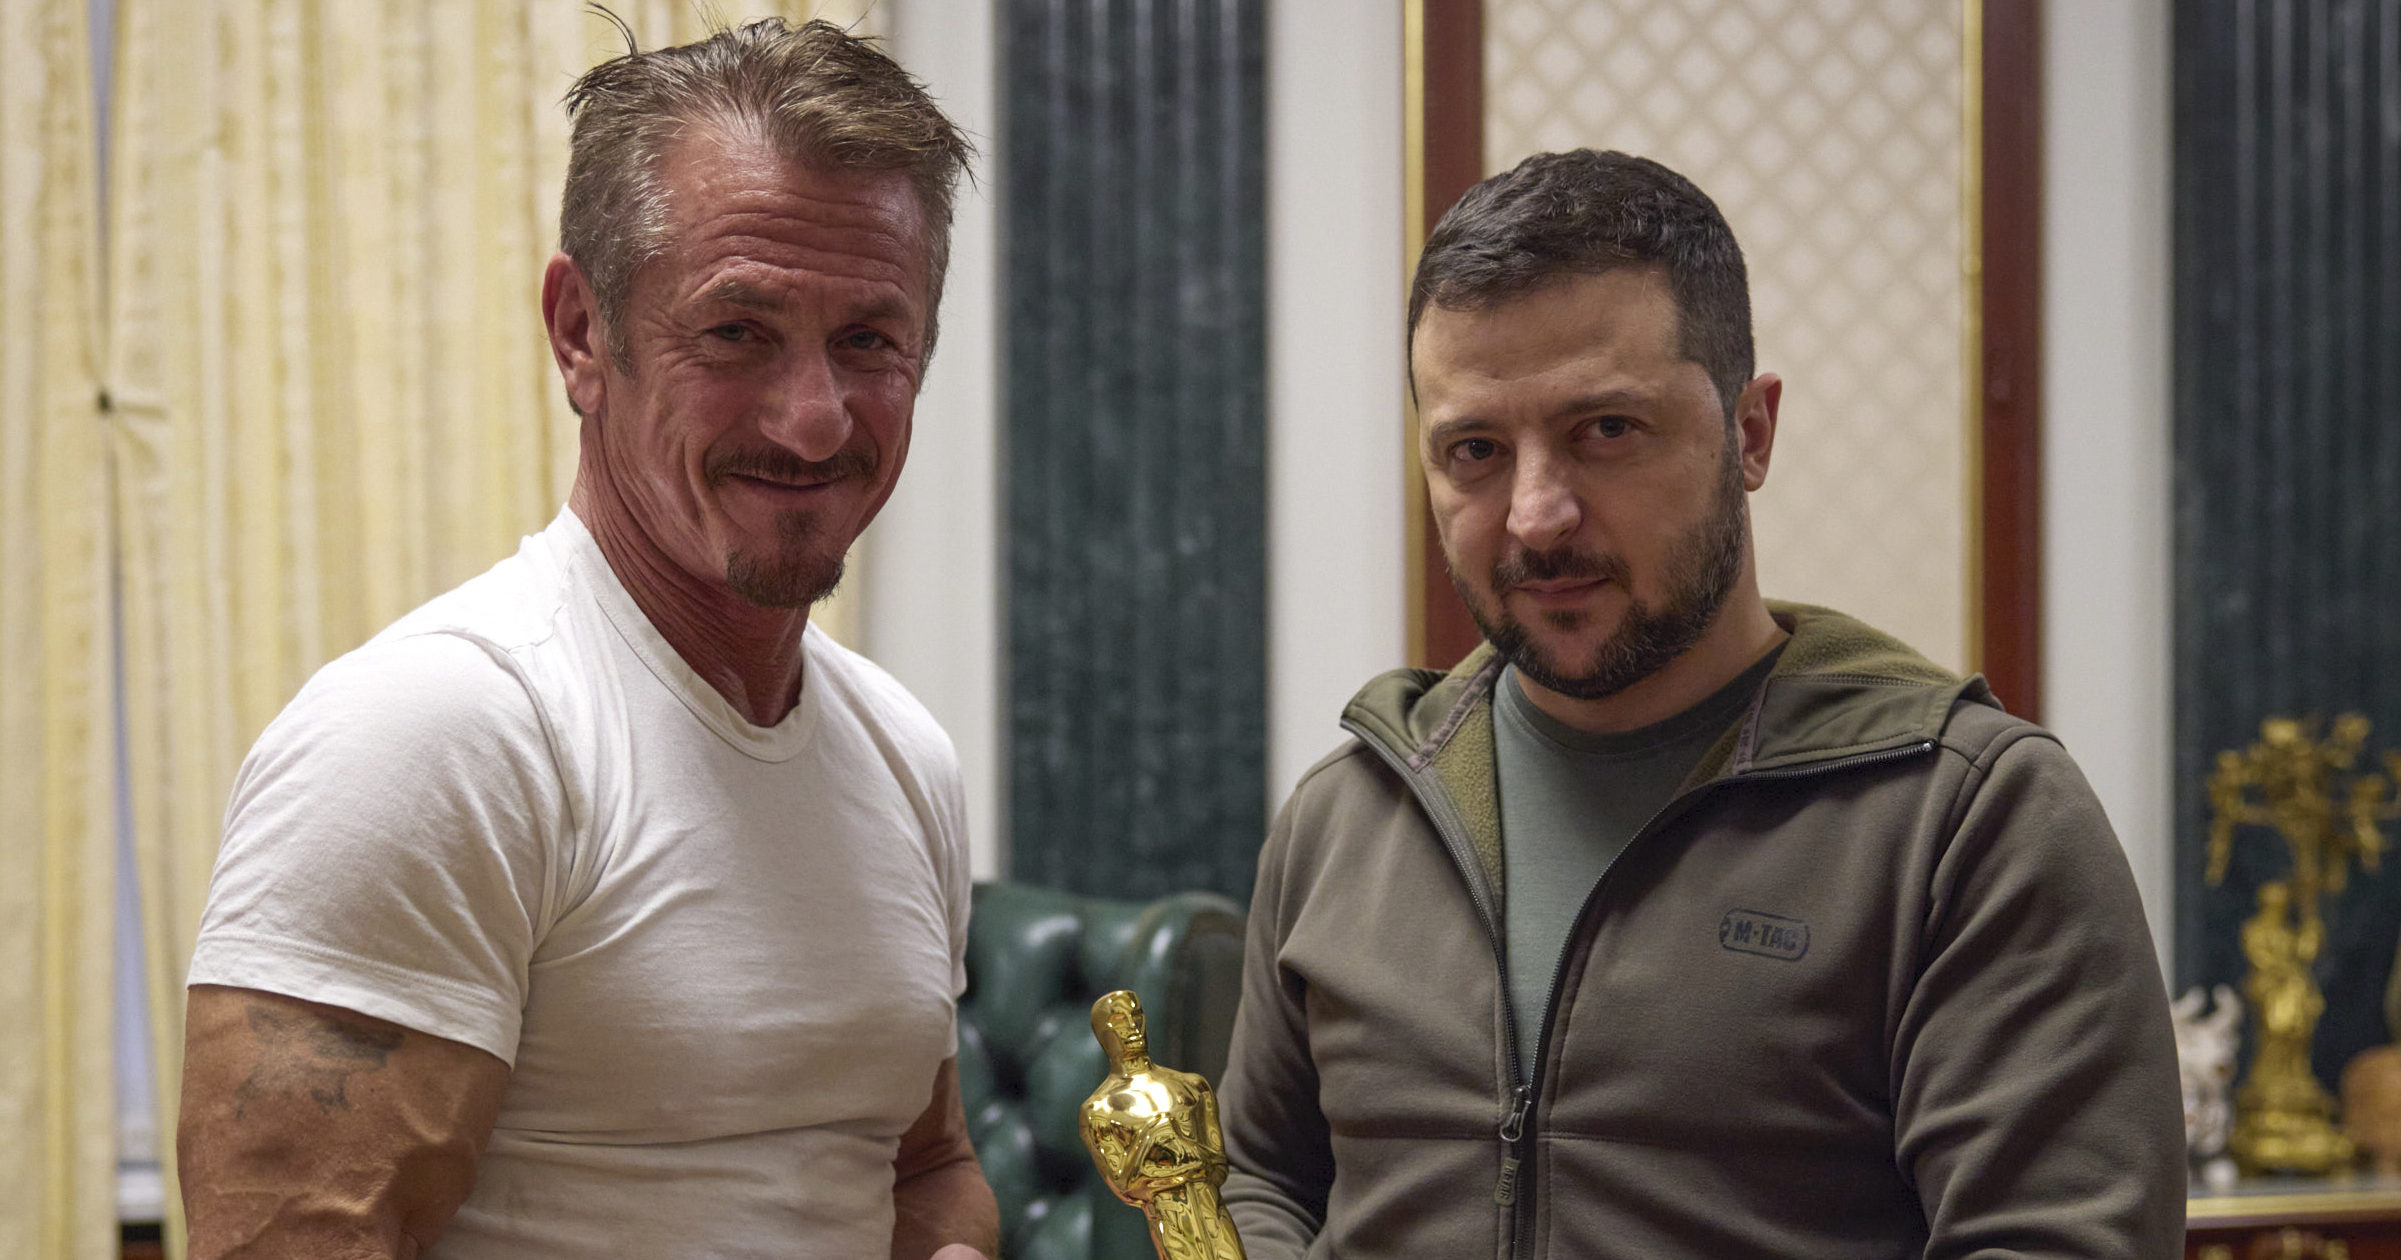 In this photo provided by the Ukrainian Press Office, Ukrainian President Volodymyr Zelesky, right, poses with U.S. actor Sean Penn, left, after receiving the latter's Oscar statuette and handing him the Order of Merit, III degree during a meeting in Kyiv, Ukraine, on Tuesday.